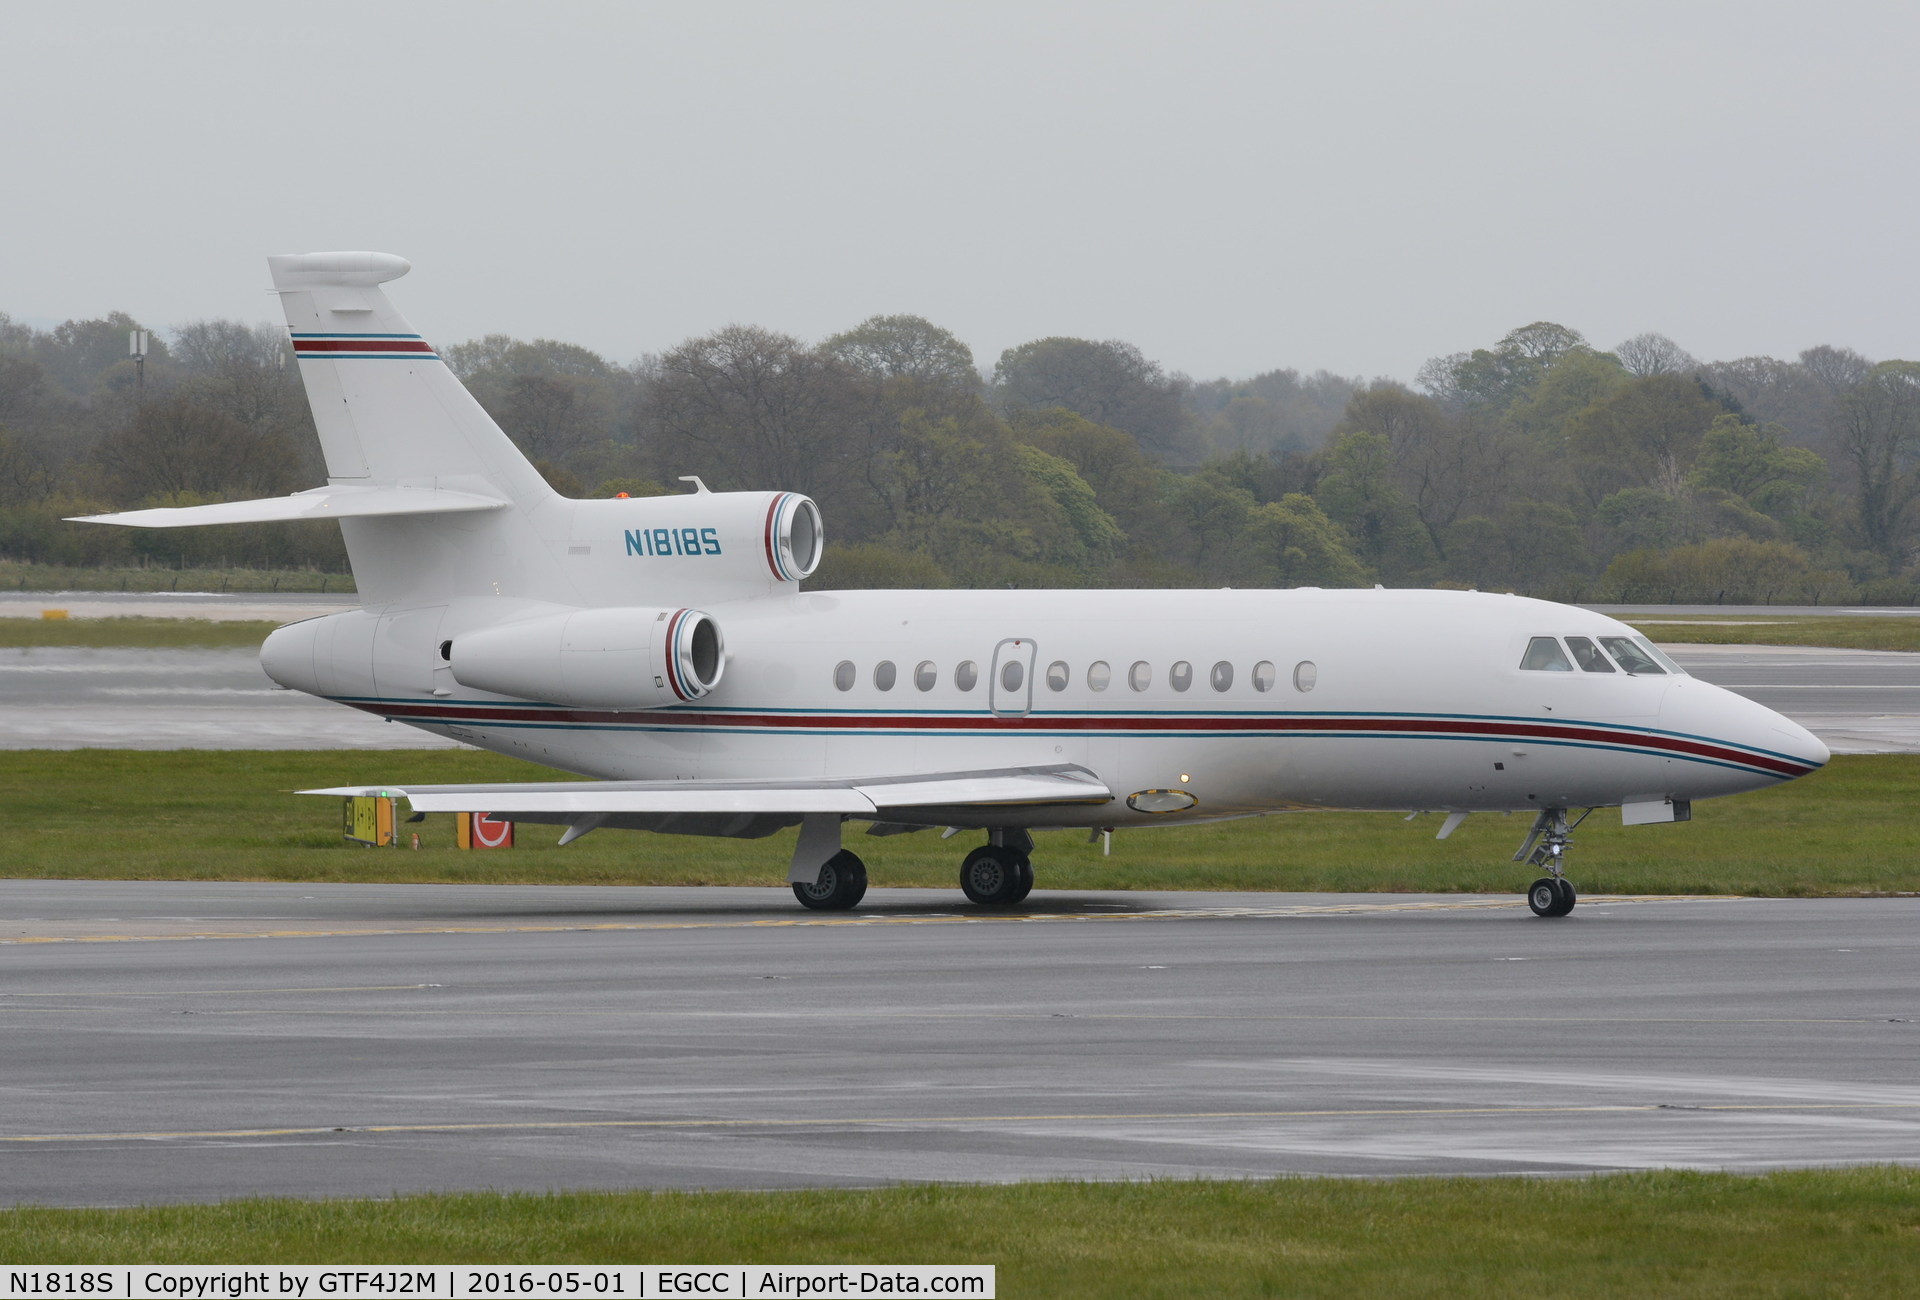 N1818S, 2005 Dassault Falcon 900EX C/N 153, N1818S at Manchester 1.5.16